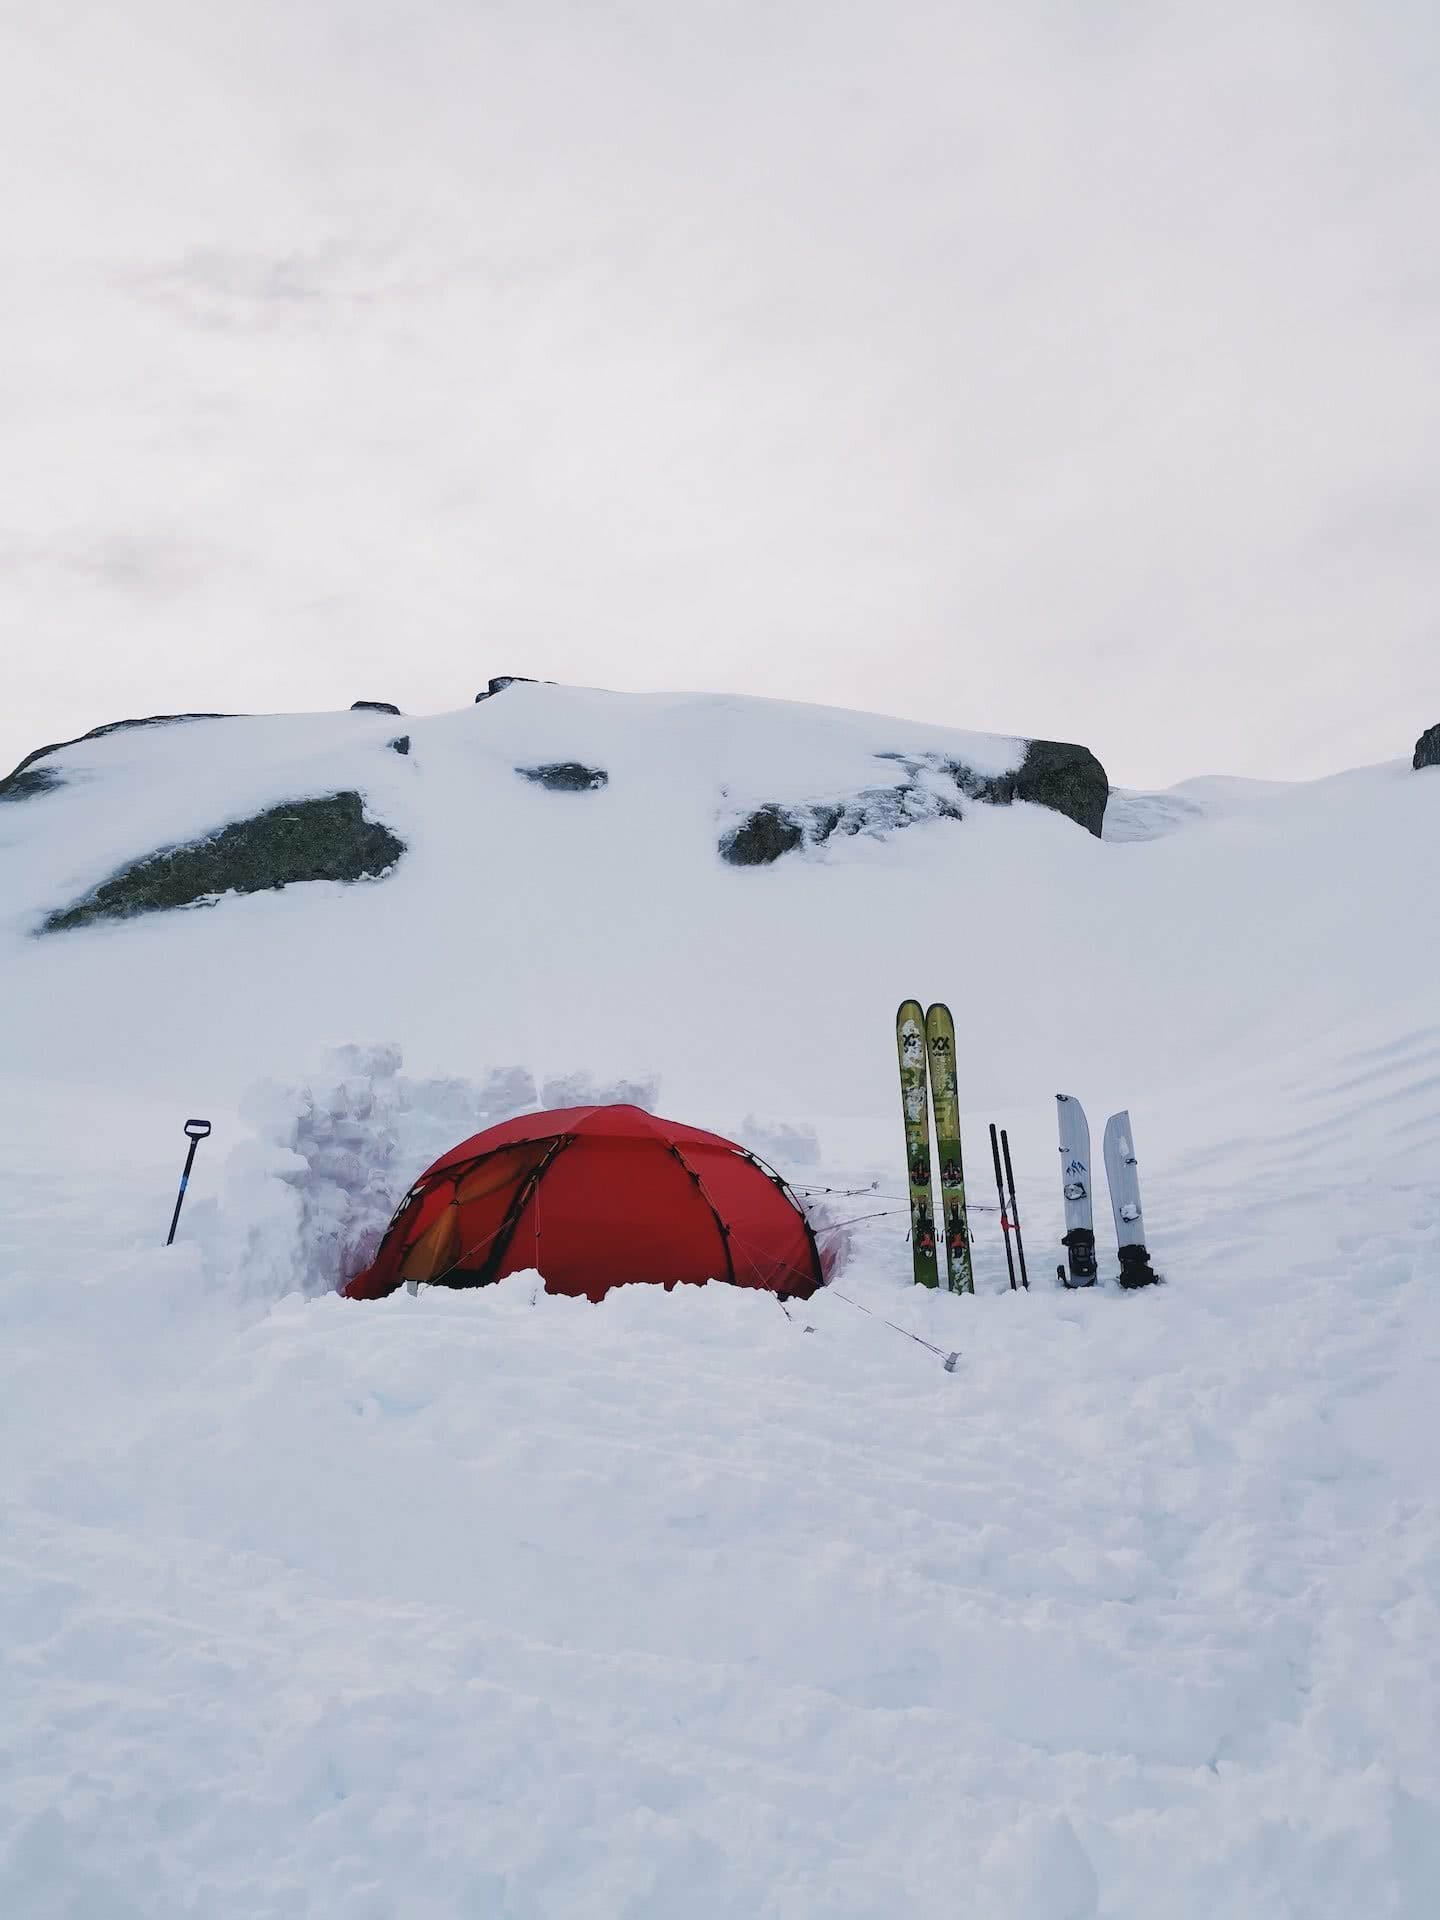 A Beginner's Guide to snow camping, Kate Donald, kosciuszko, jagungal, tent, snow, backcountry, nsw,